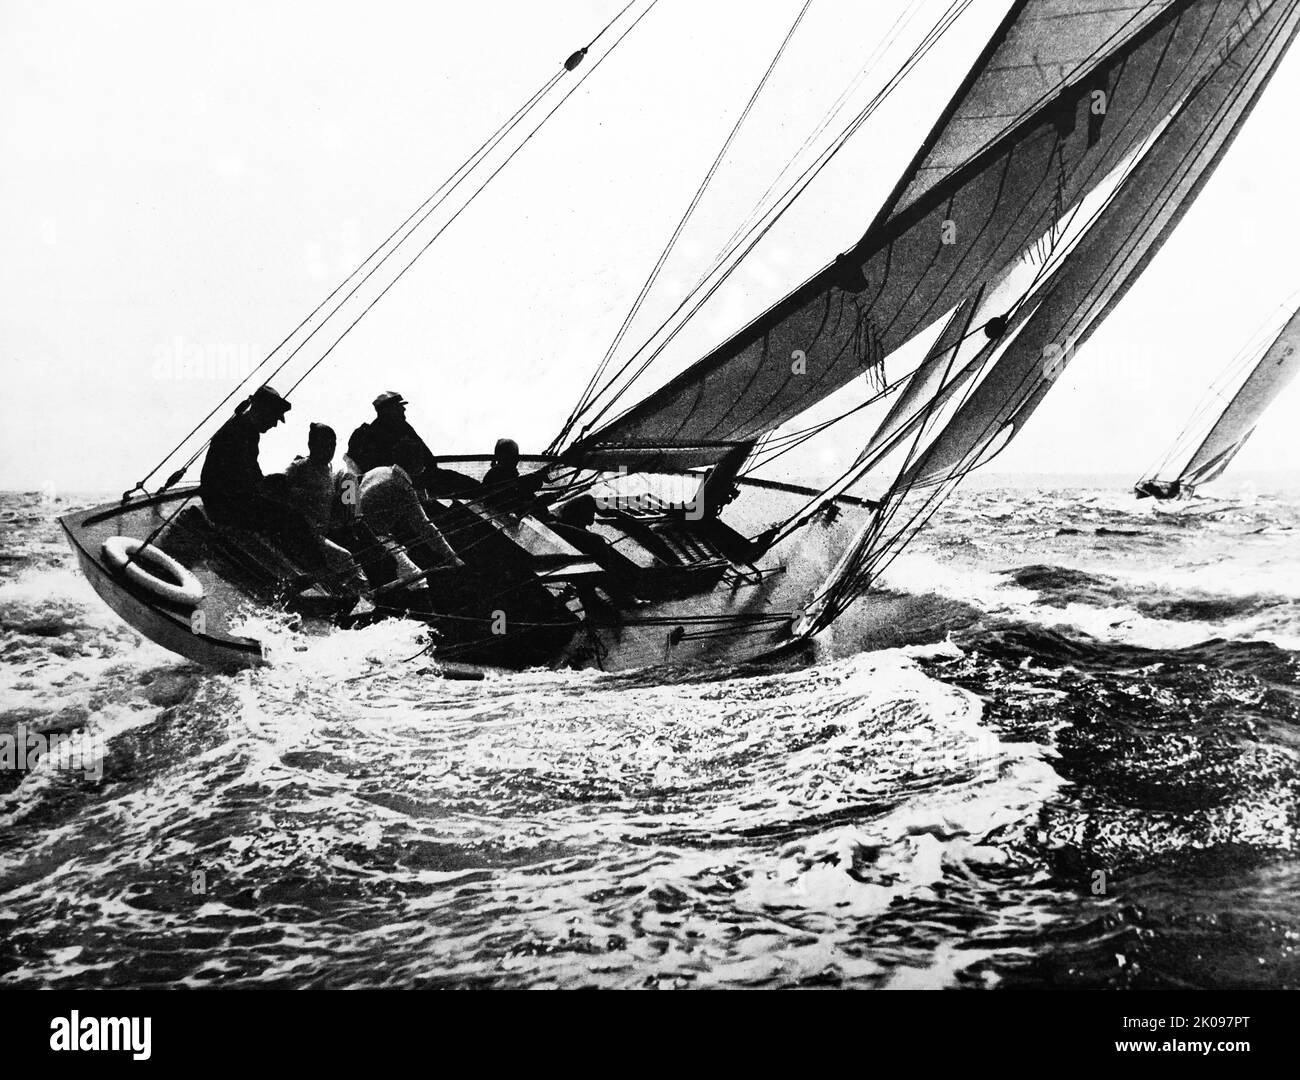 High On The Wind. Black and white photograph of sailing boat and crew. Stock Photo